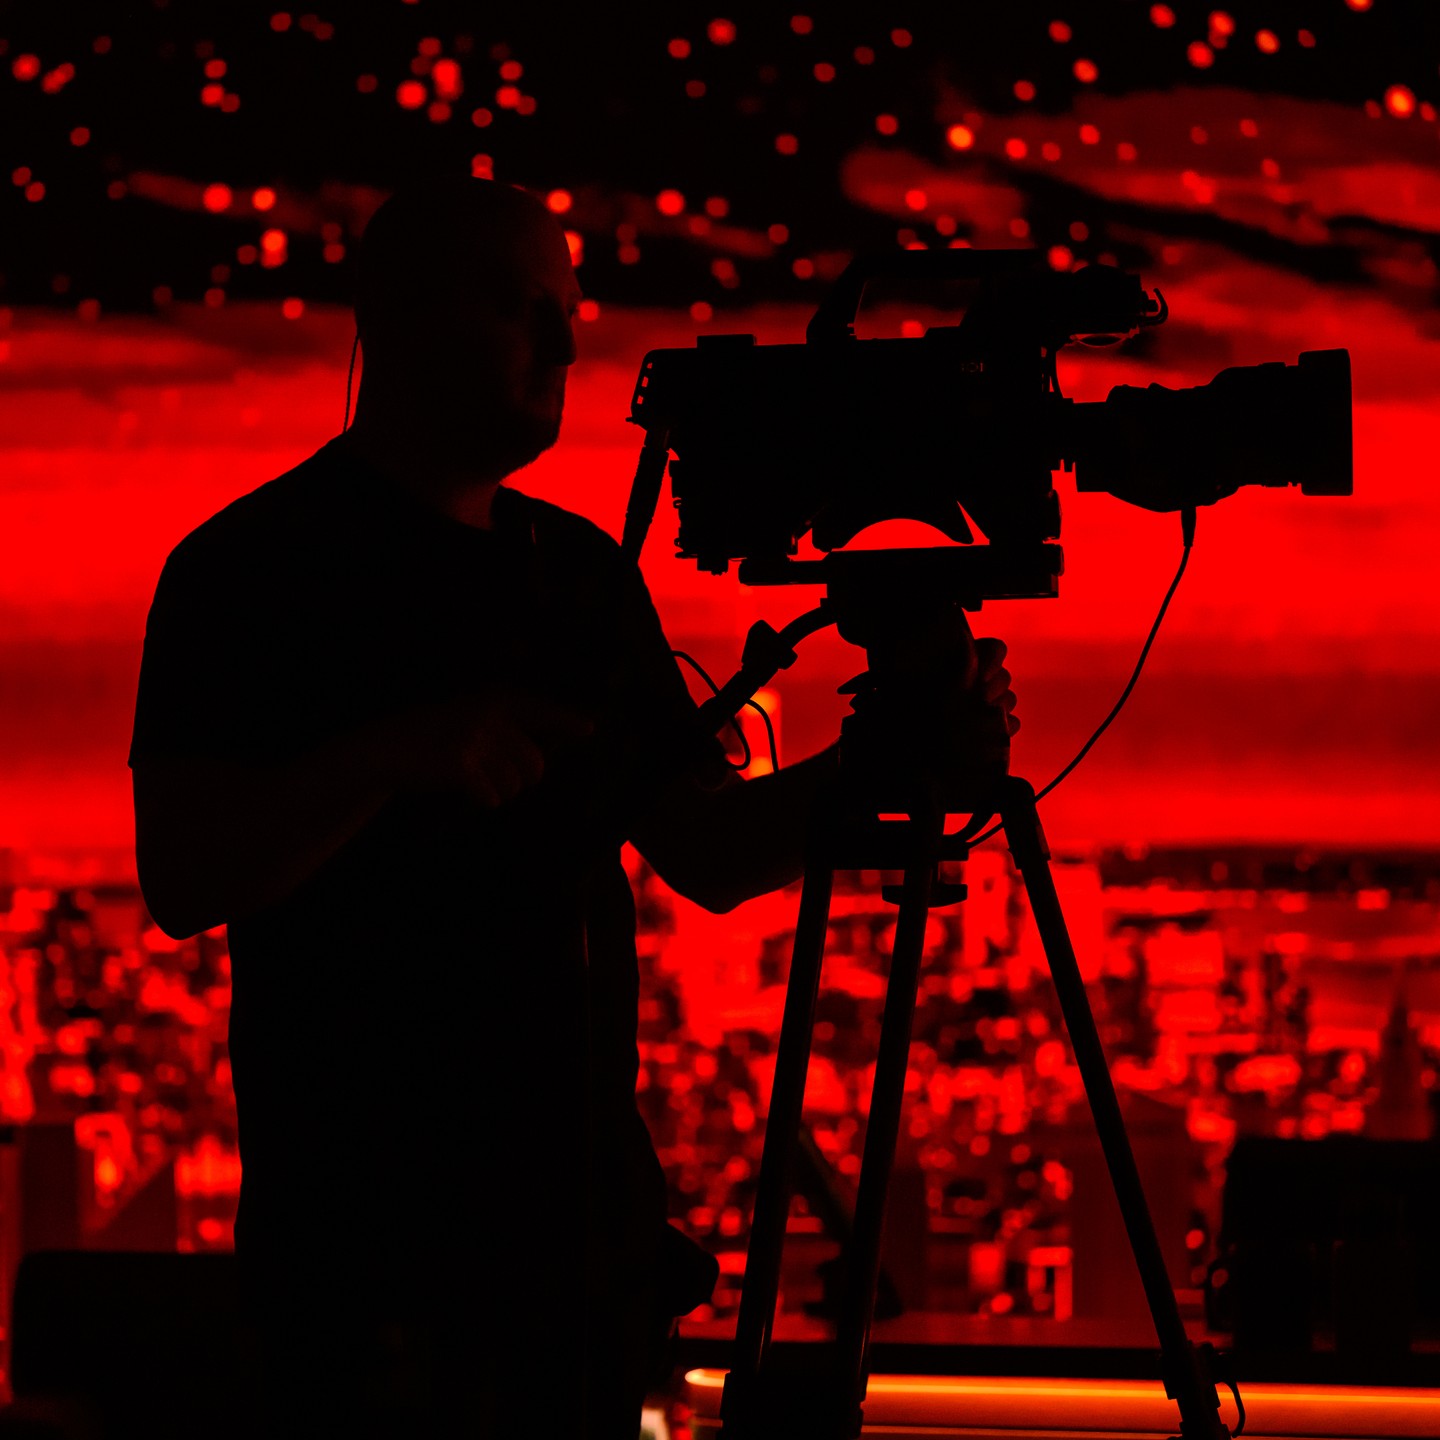 A snap from music rehearsal this morning with camera op Sean. Music today on @fallontonight is the legend Lenny Kravitz, and they turned the screens in the studio red for his performance. Camera blocking/rehearsal had just wrapped and I saw this just before the studio lights came up, but loved the stark silhouette against the deep red of the screen.